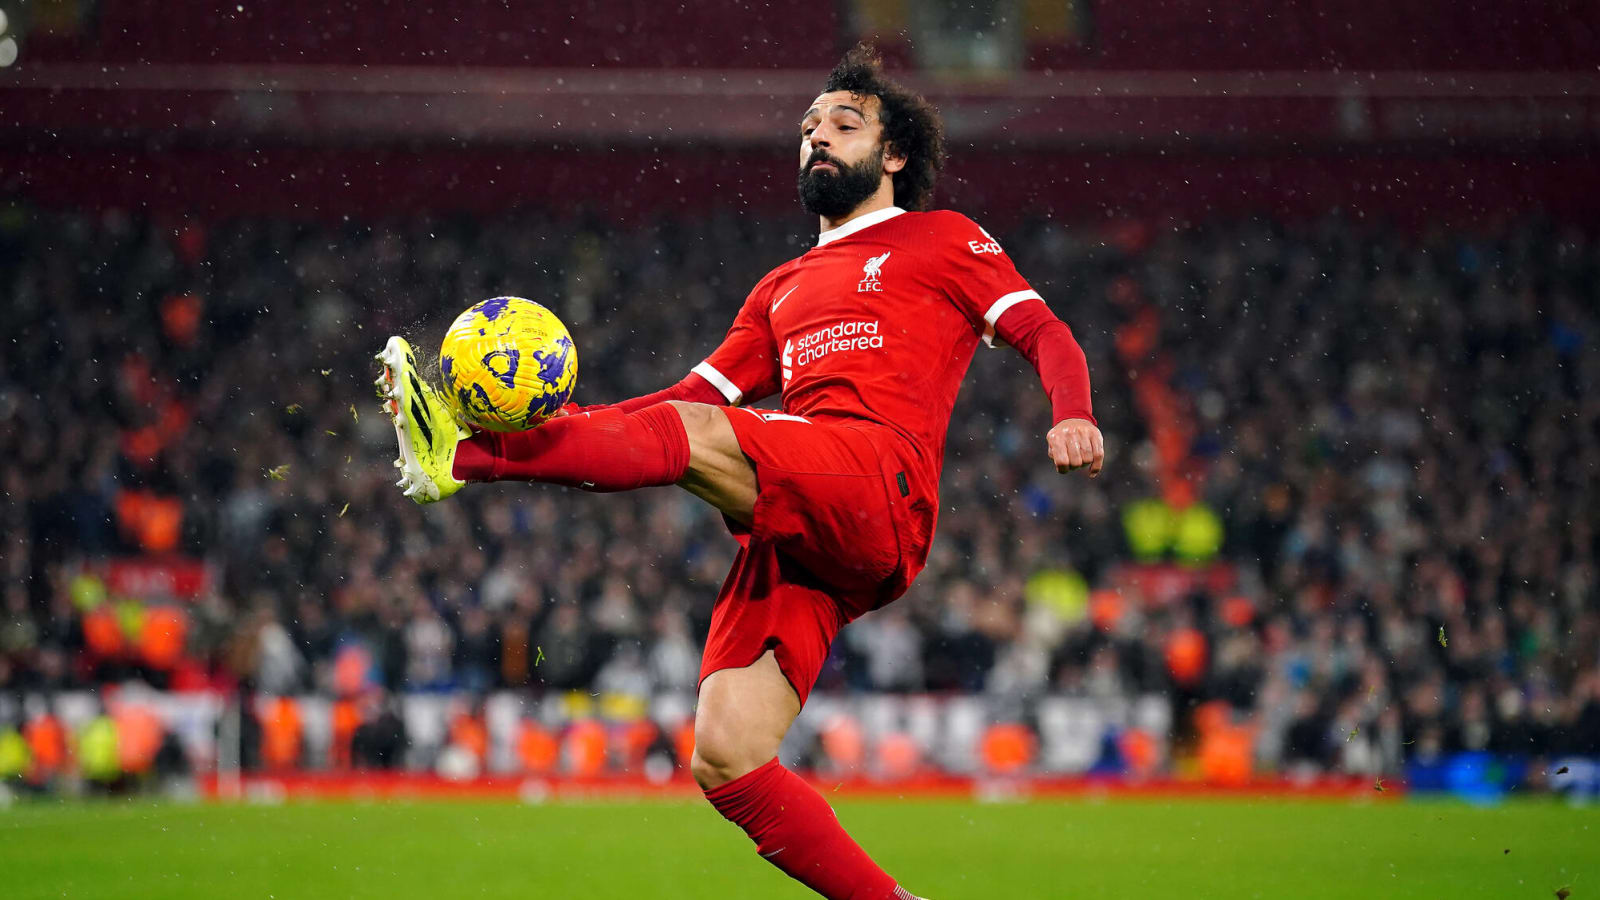 David Ornstein provides Liverpool fans with great news regarding the future of Salah